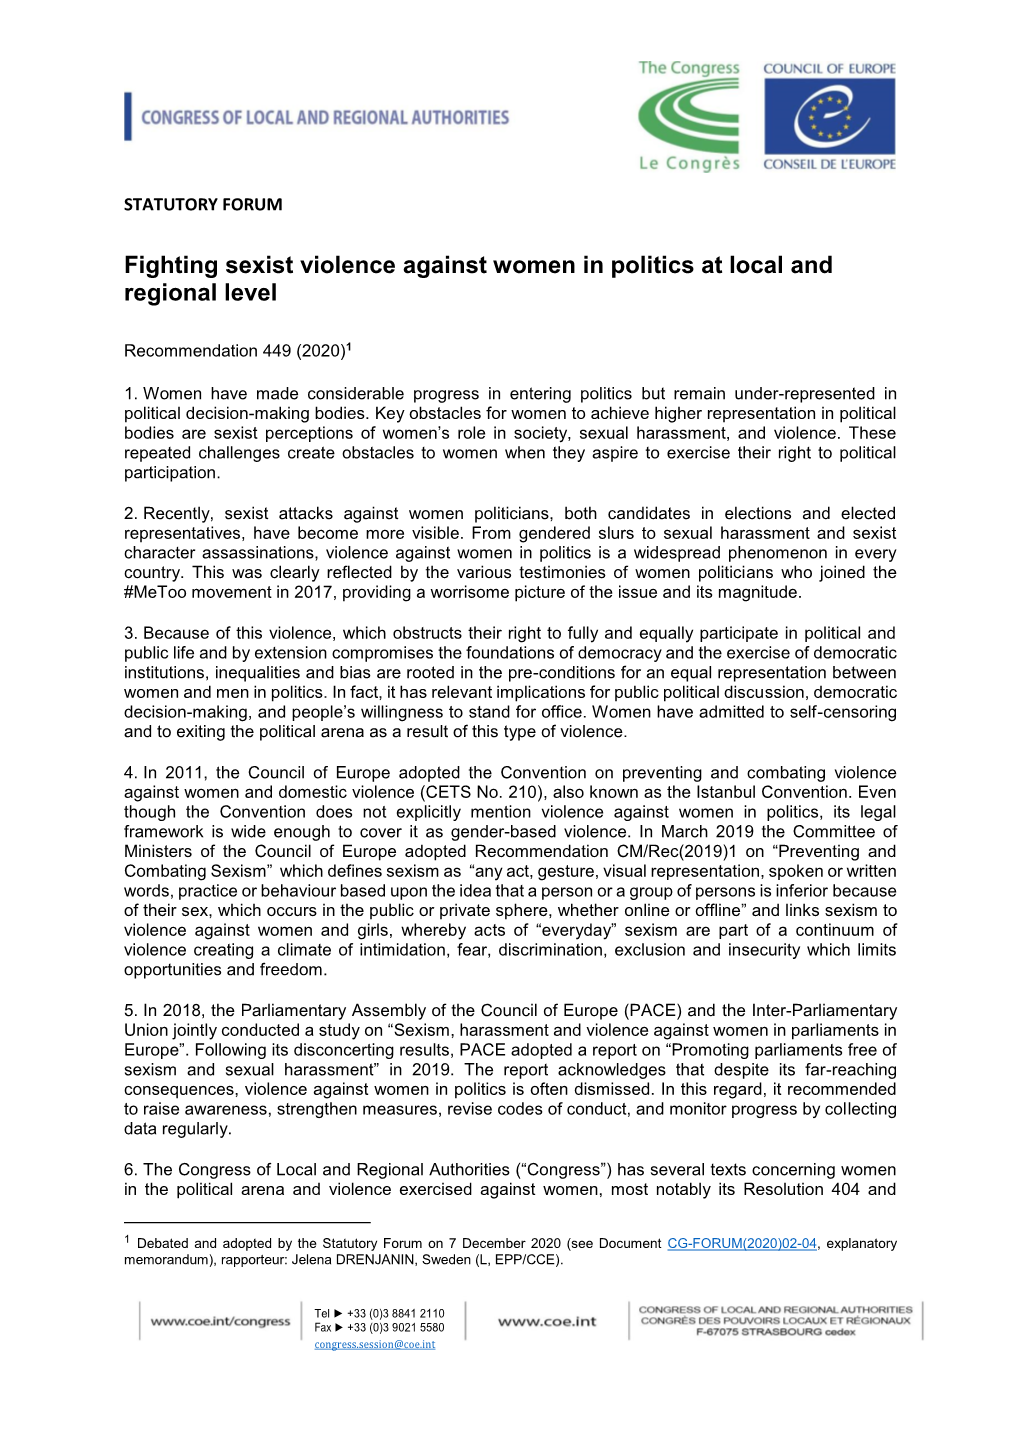 Fighting Sexist Violence Against Women in Politics at Local and Regional Level